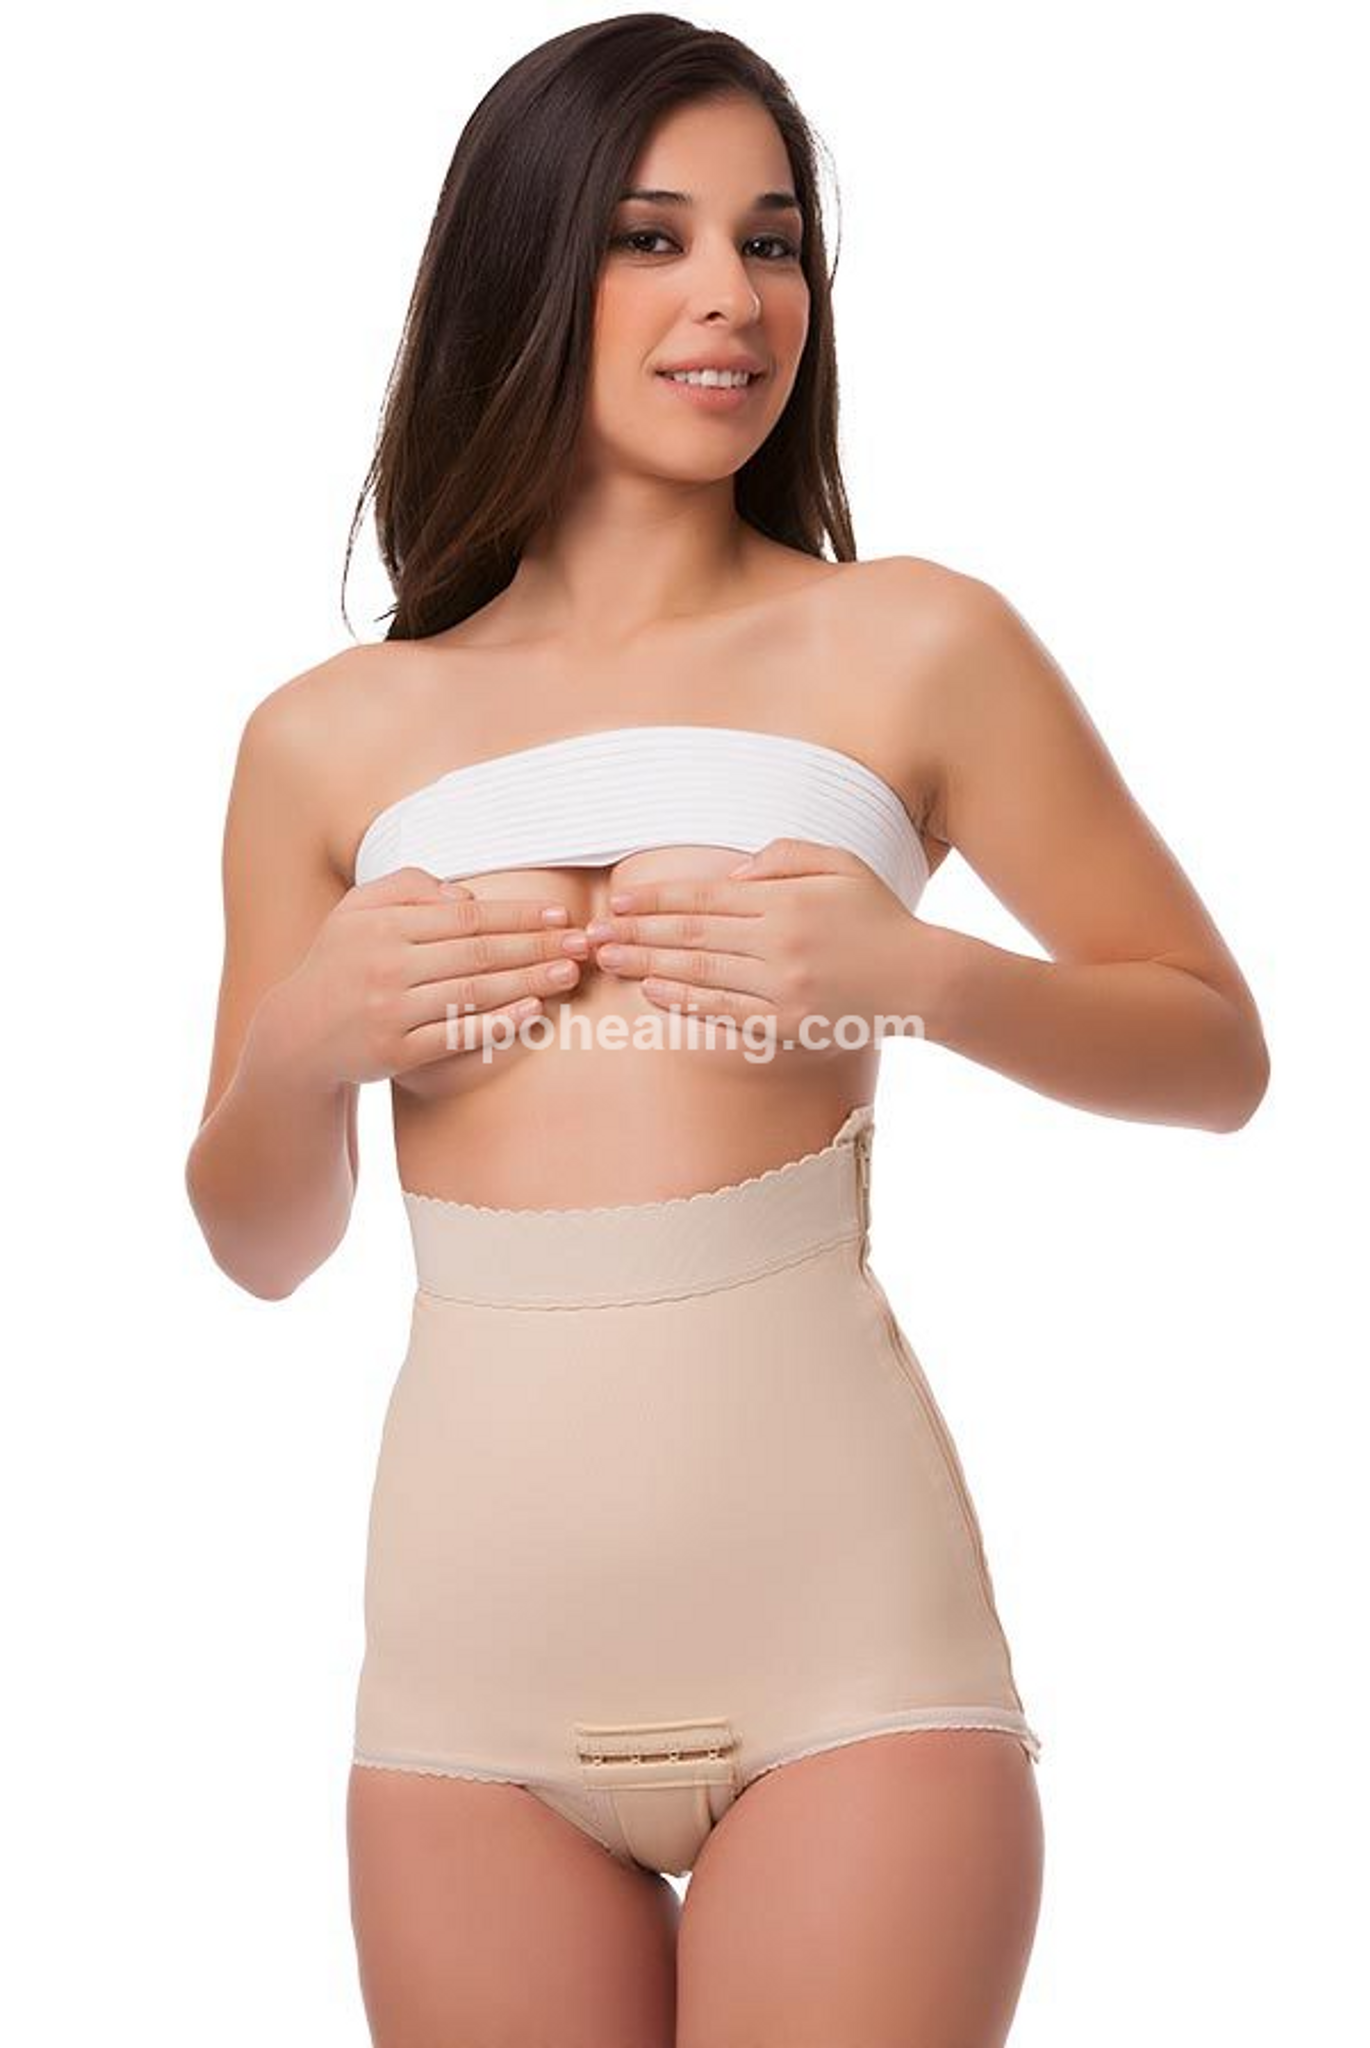 Post Surgical Breast Band - Breast Implant Stabilizer – Elias